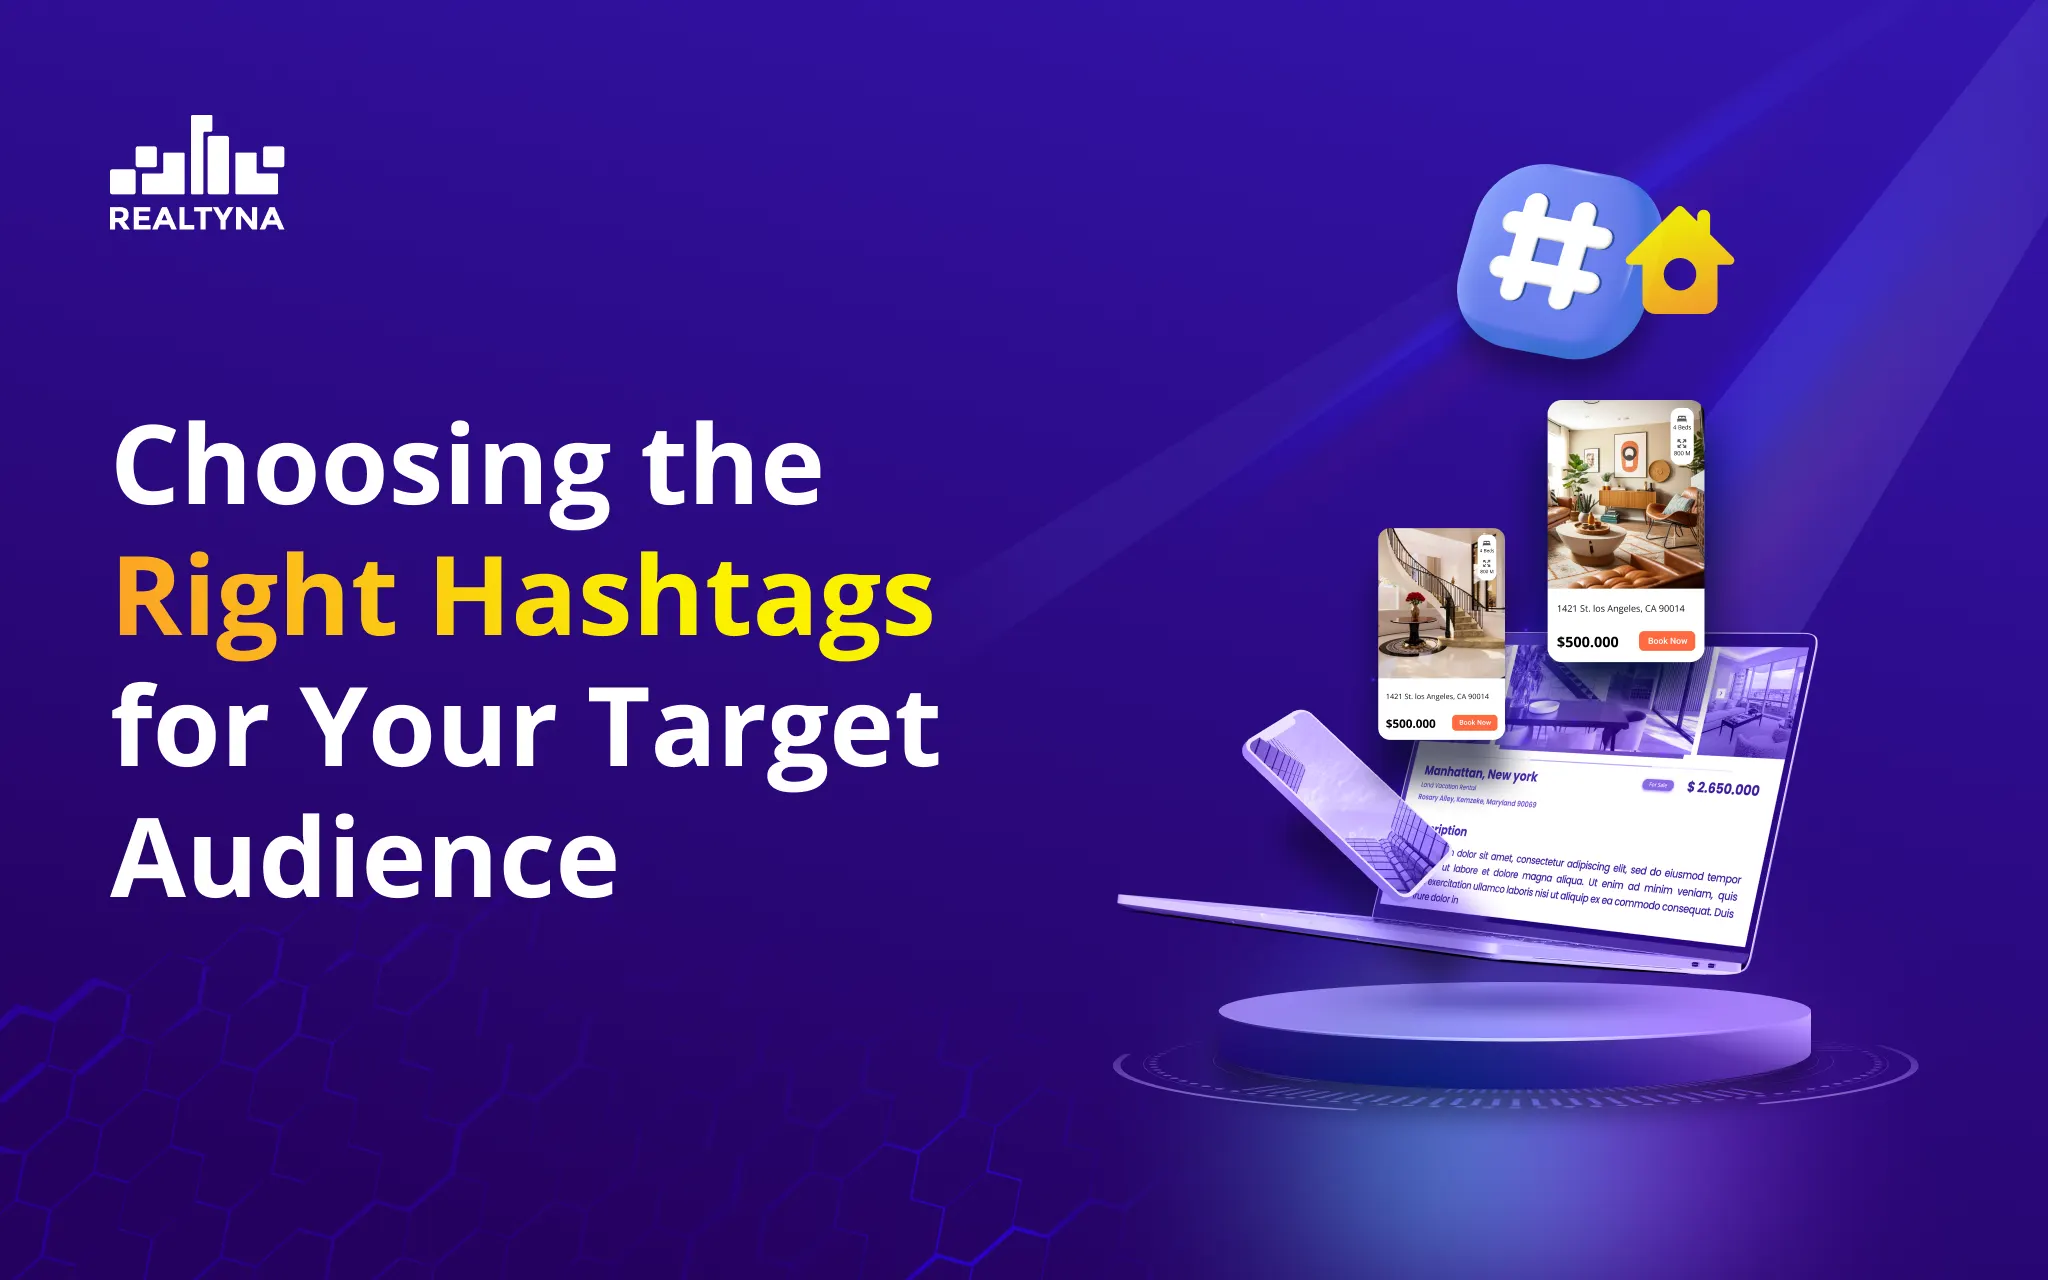 Choosing the Right Hashtags for Your Target Audience